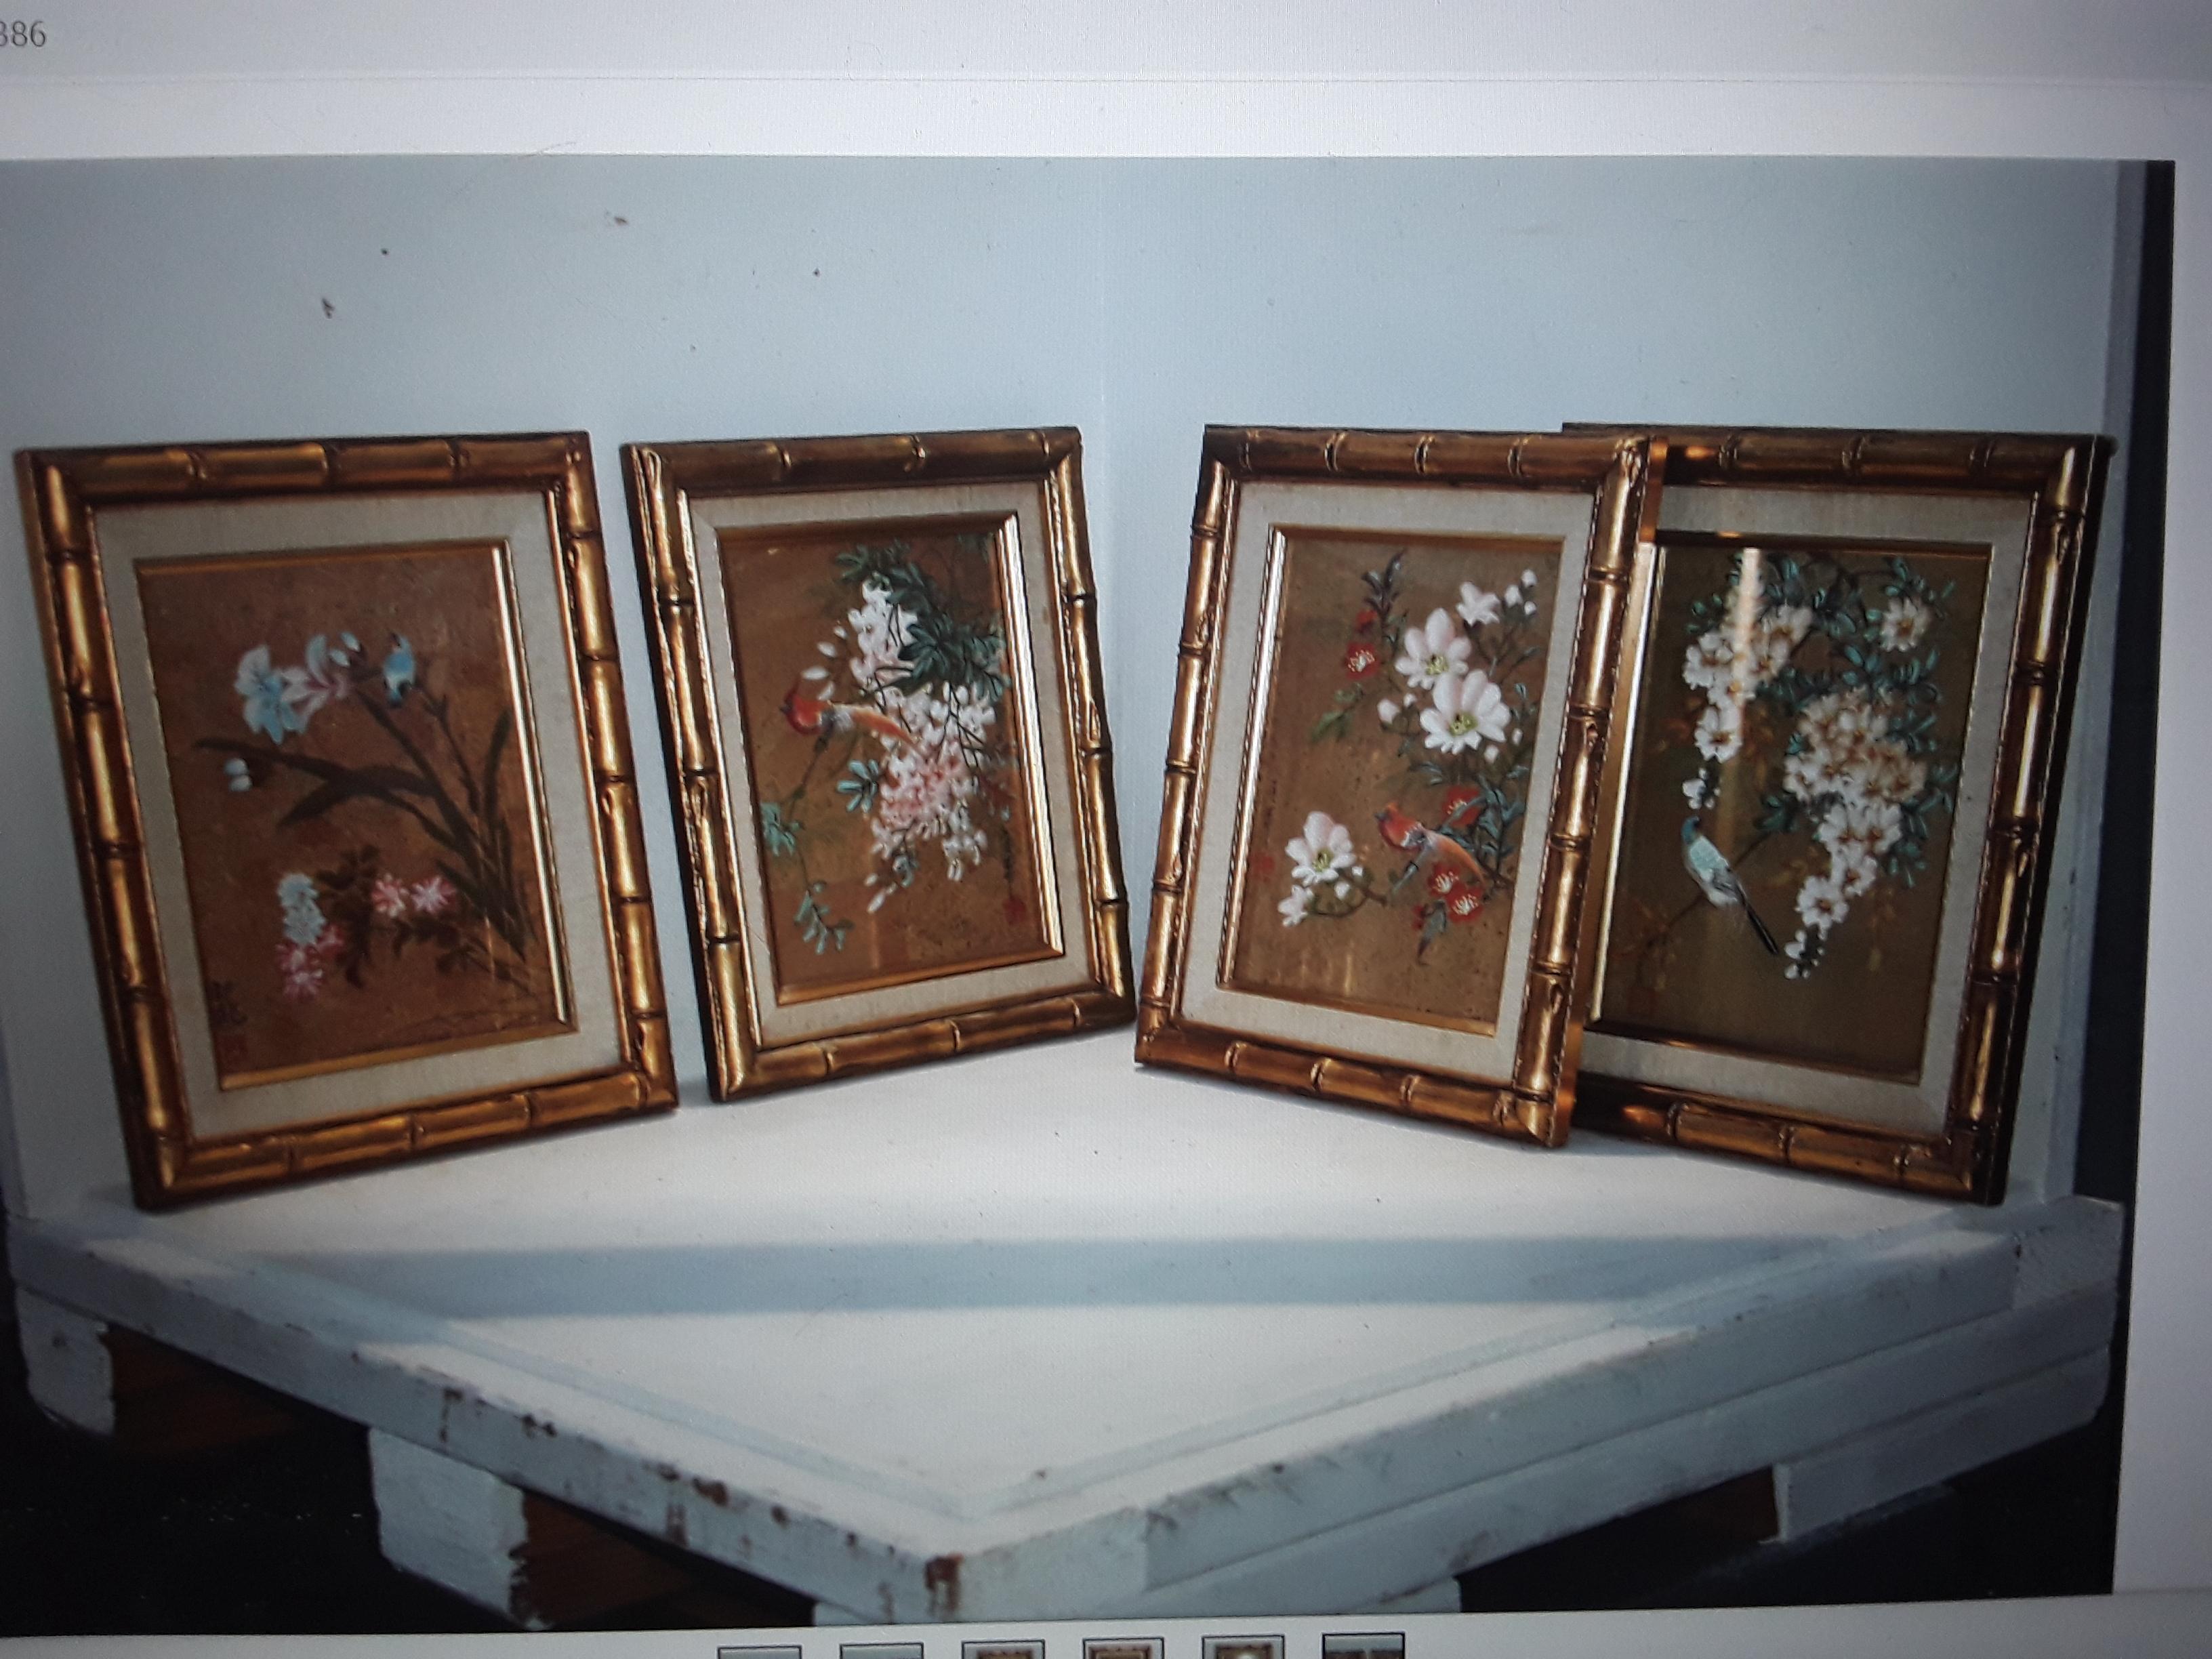 Set of 4 -1940's Asian Hollywood Regency Period Artisan Hand Painted [on a gilt cork ground] .Flowers and Birds depicted. These are beautiful and the set is framed with gilt faux Bamboo.